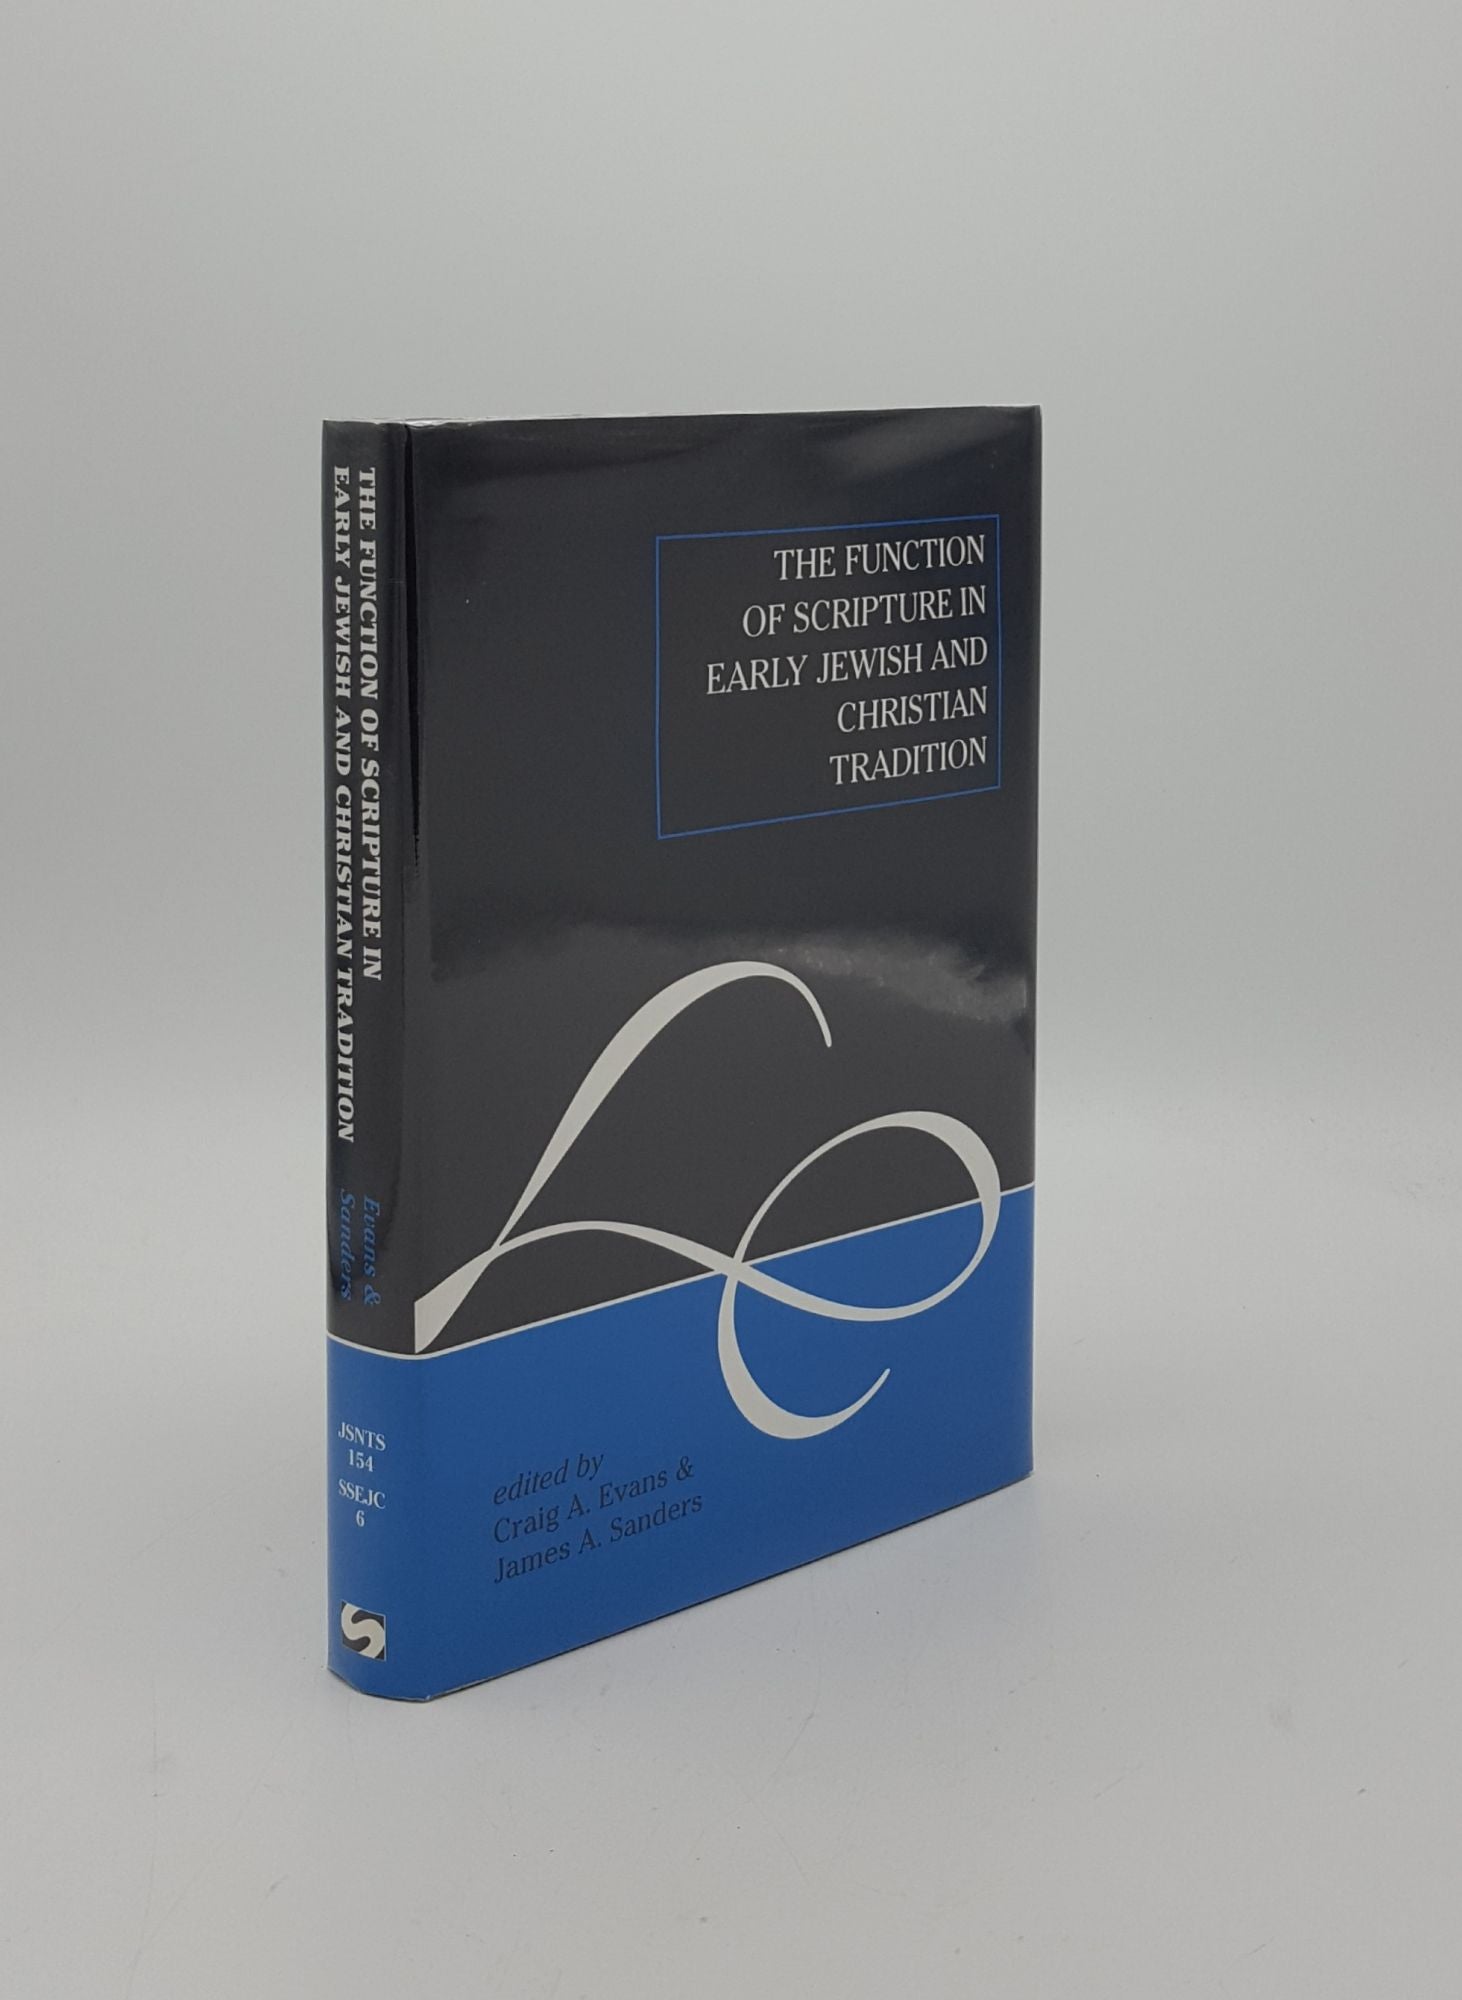 EVANS Craig A., SANDERS James A. - The Function of Scripture in Early Jewish and Christian Tradition (the Library of New Testament Studies)